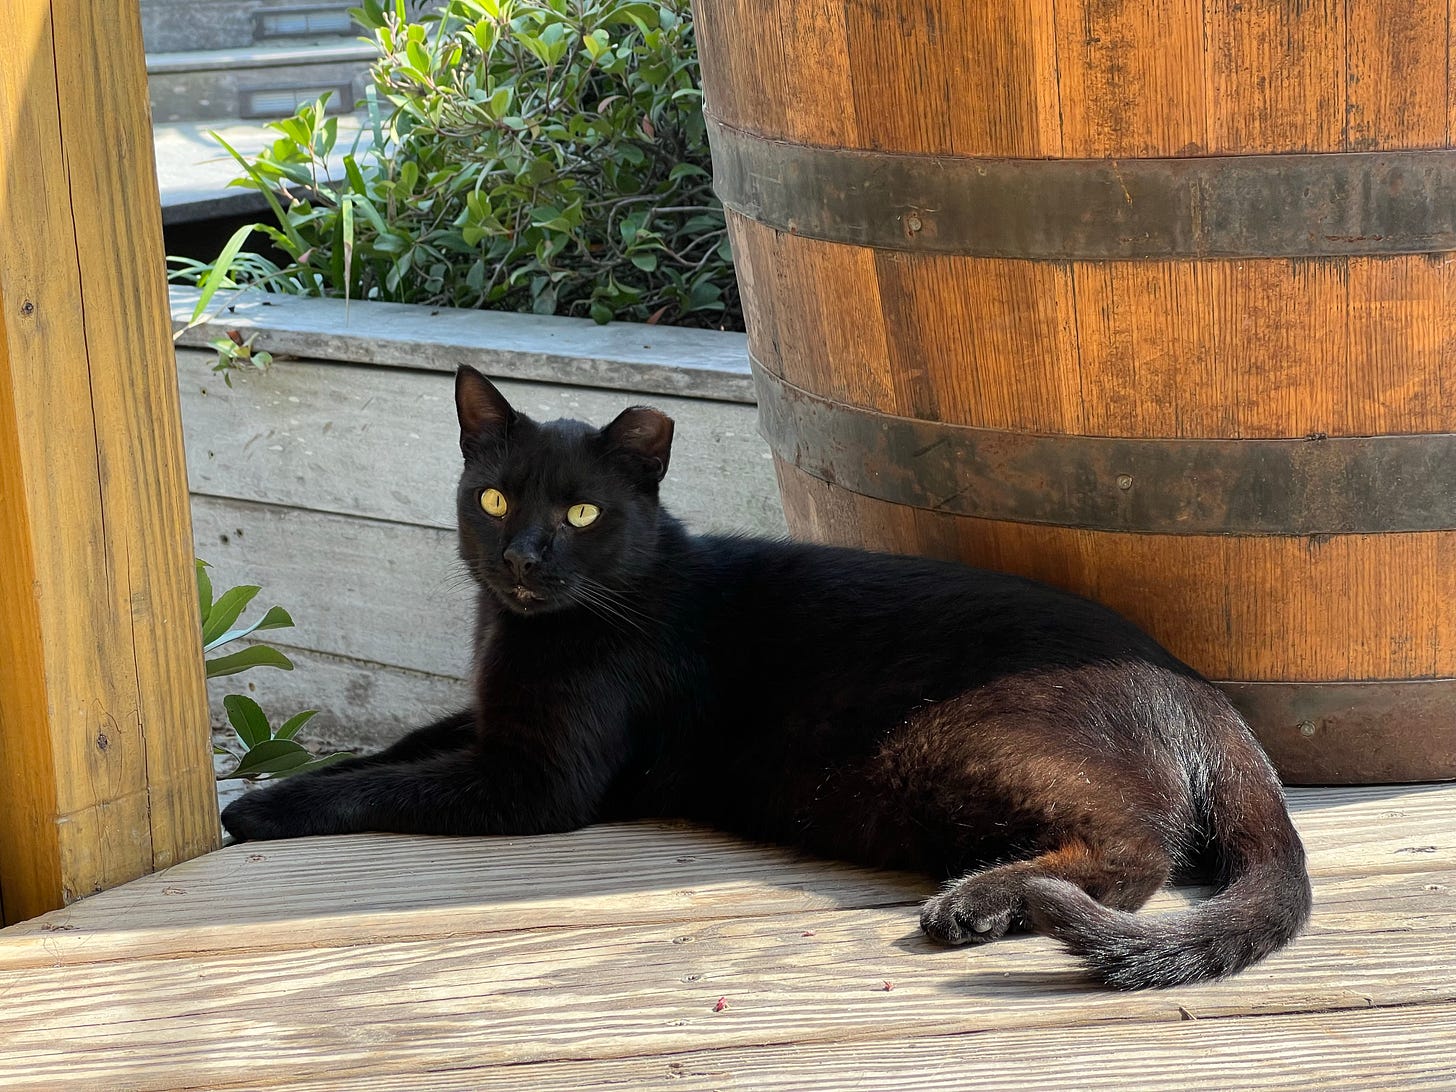 Black cat with a clipped ear lounging on a deck in front of a barrel